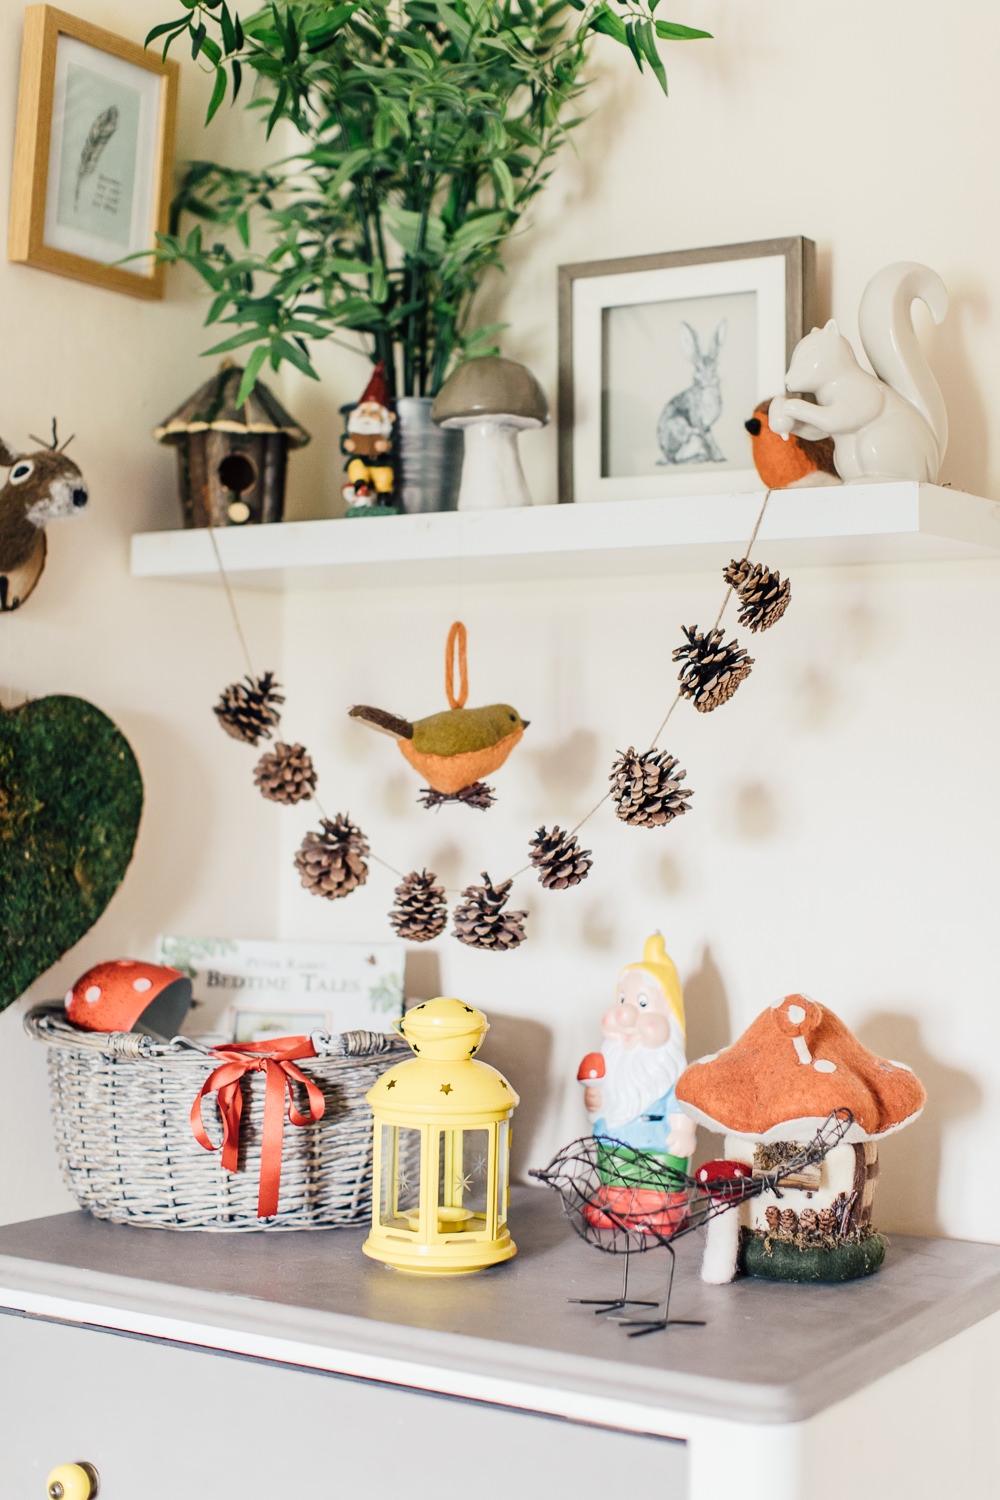 Hanging pine cones garland | Pine cone garland in a woodland inspired children's bedroom in a rented property with homemade decor and details.